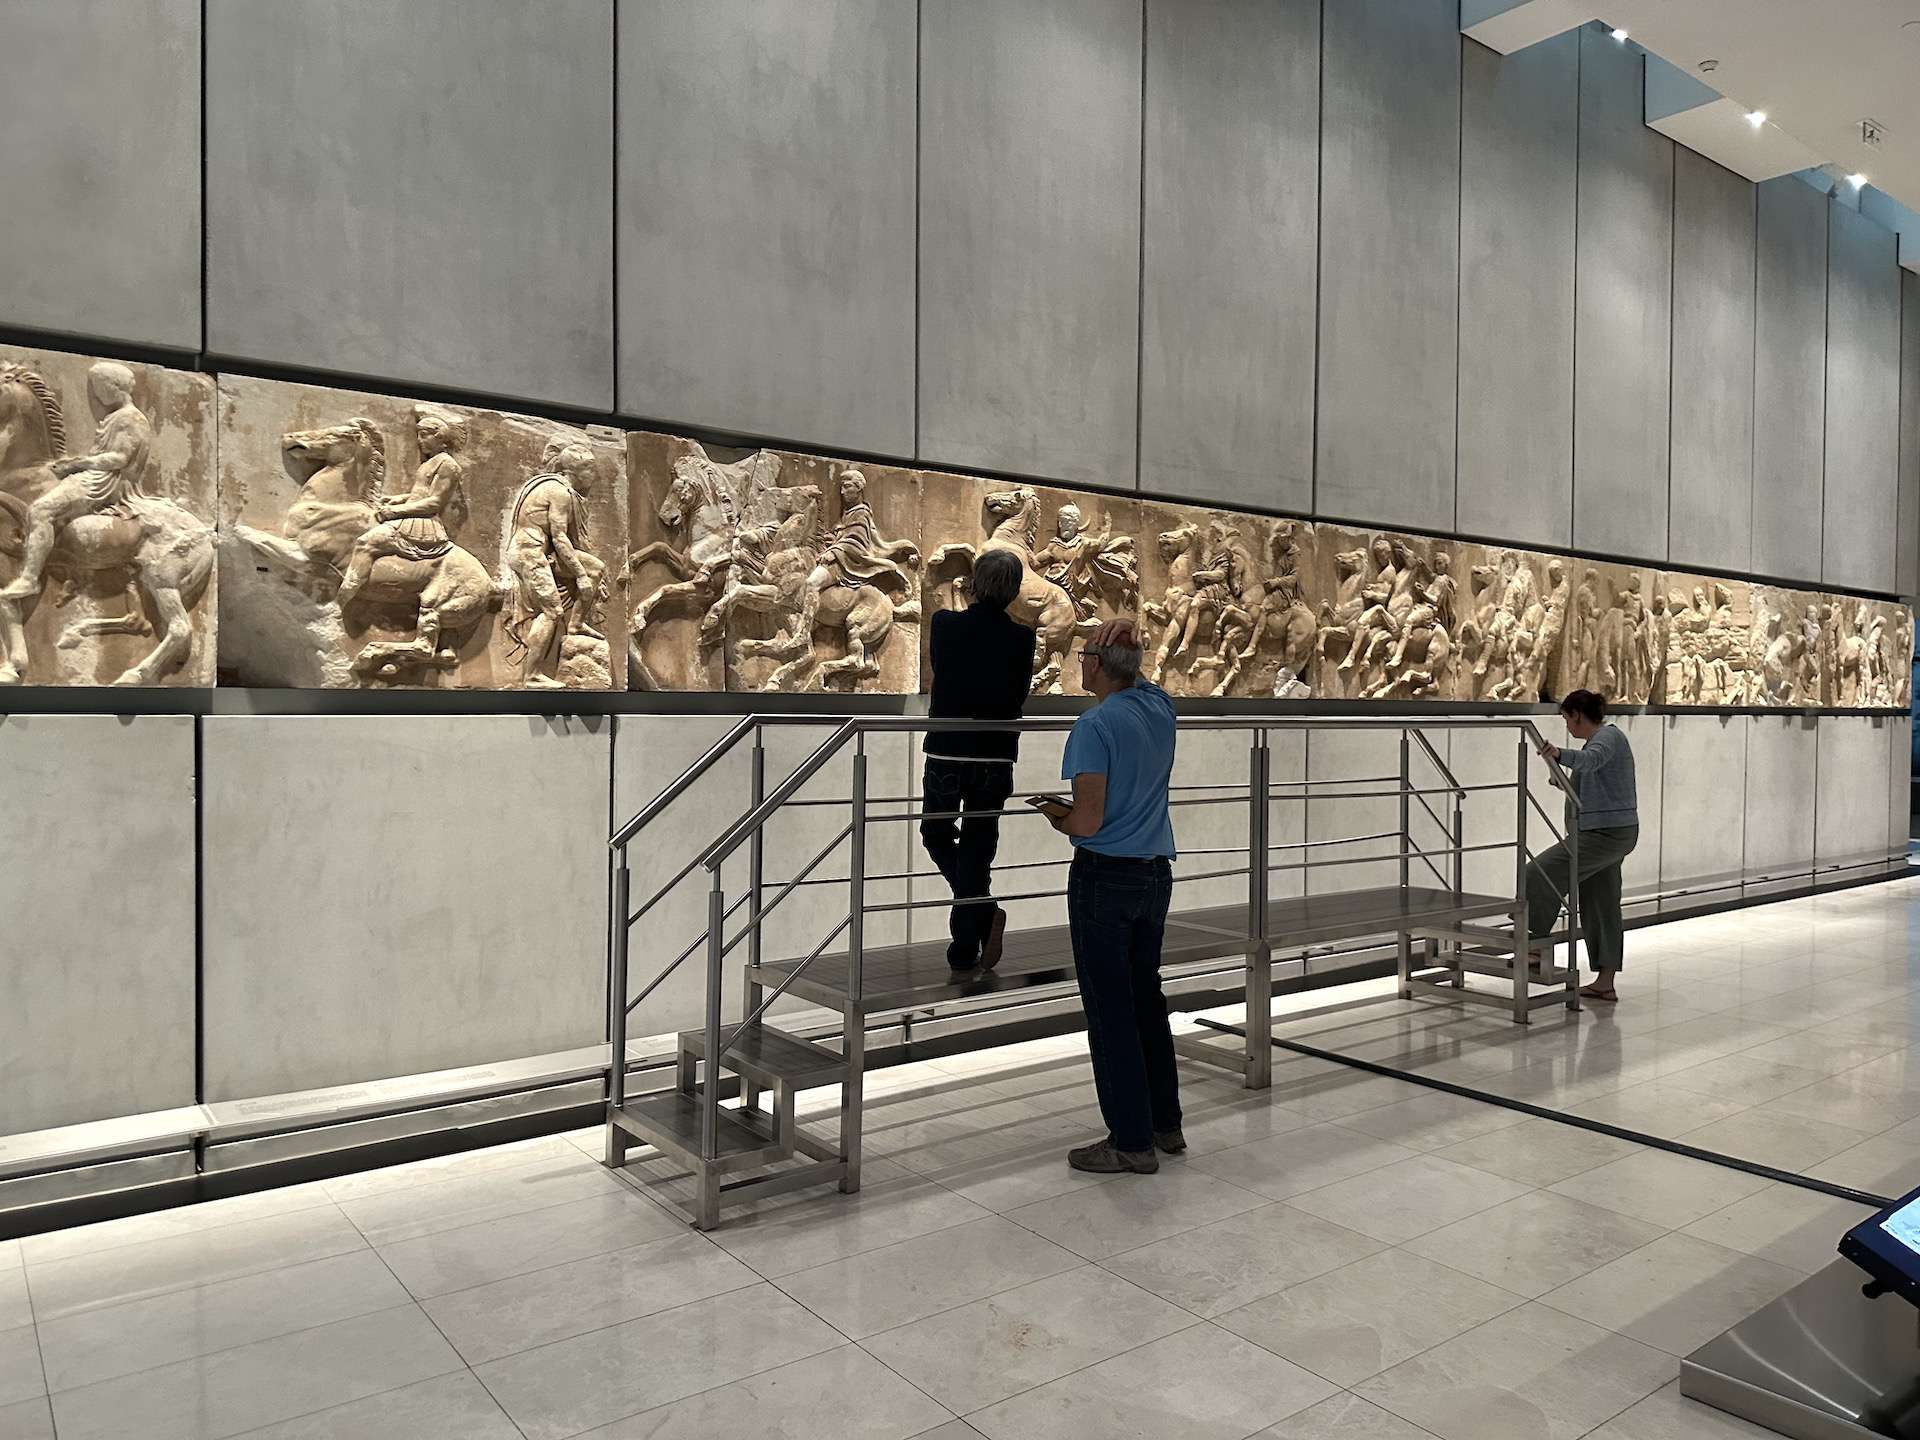 West frieze of the Parthenon at the Acropolis Museum in Athens, Greece